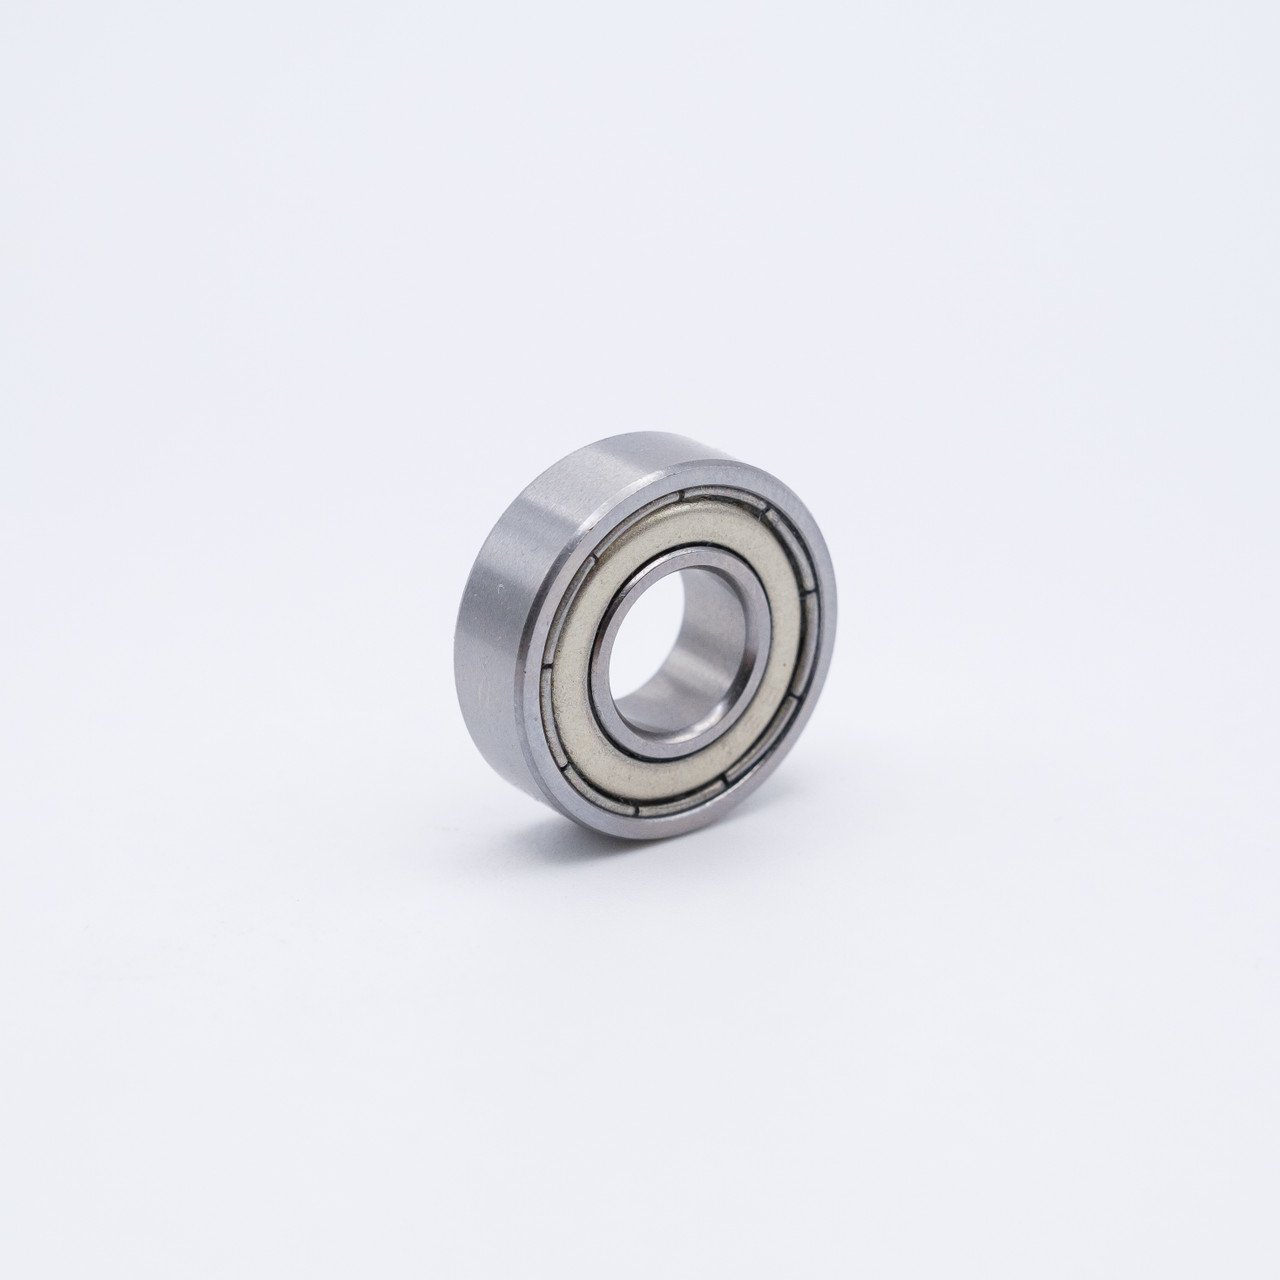 SR155-ZZEE Stainless Steel Extended Mini Ball Bearing 5/32x5/16x5/32 Angled View